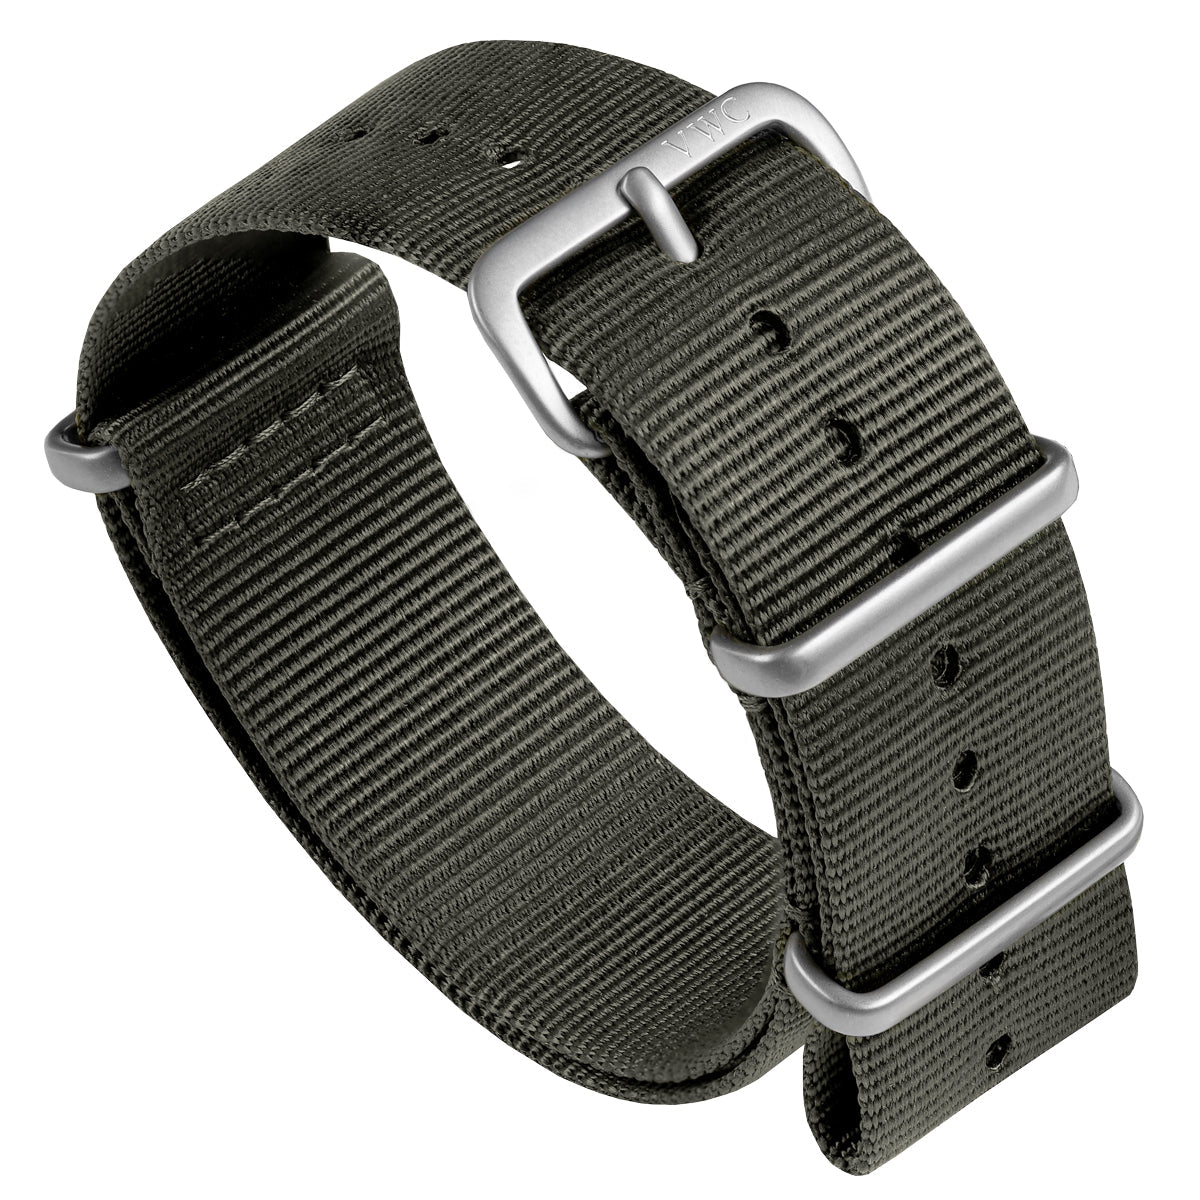 The Vintage Watch Company Nylon Military Watch Strap - Admiralty Grey